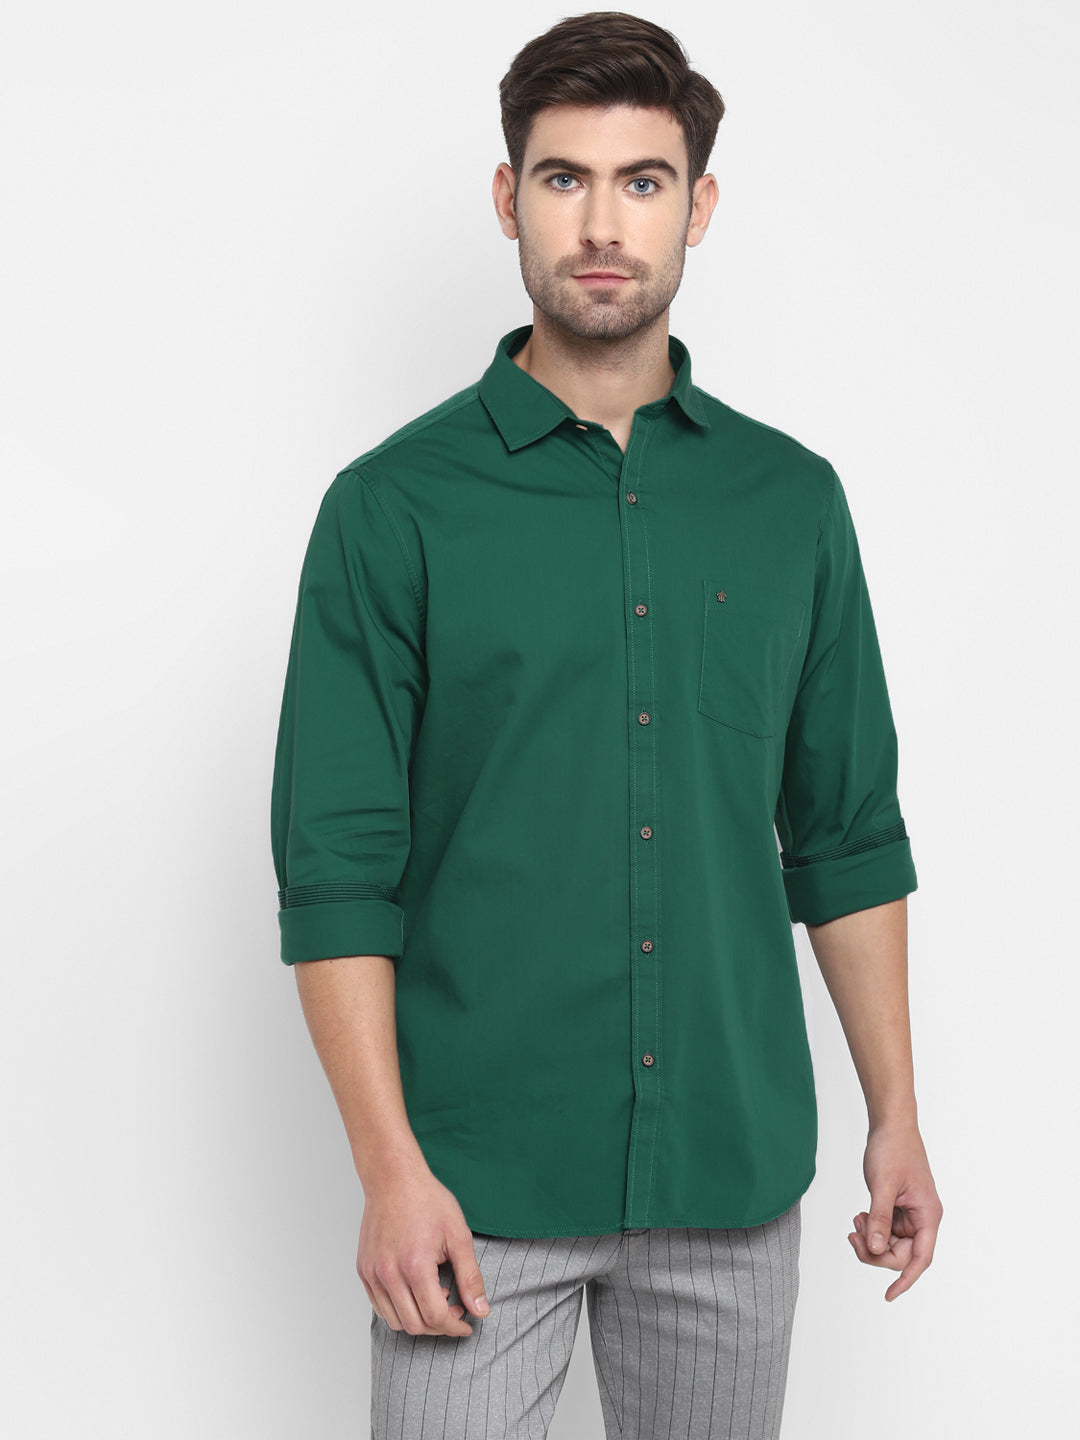 Solid Green Slim Fit Causal Shirt